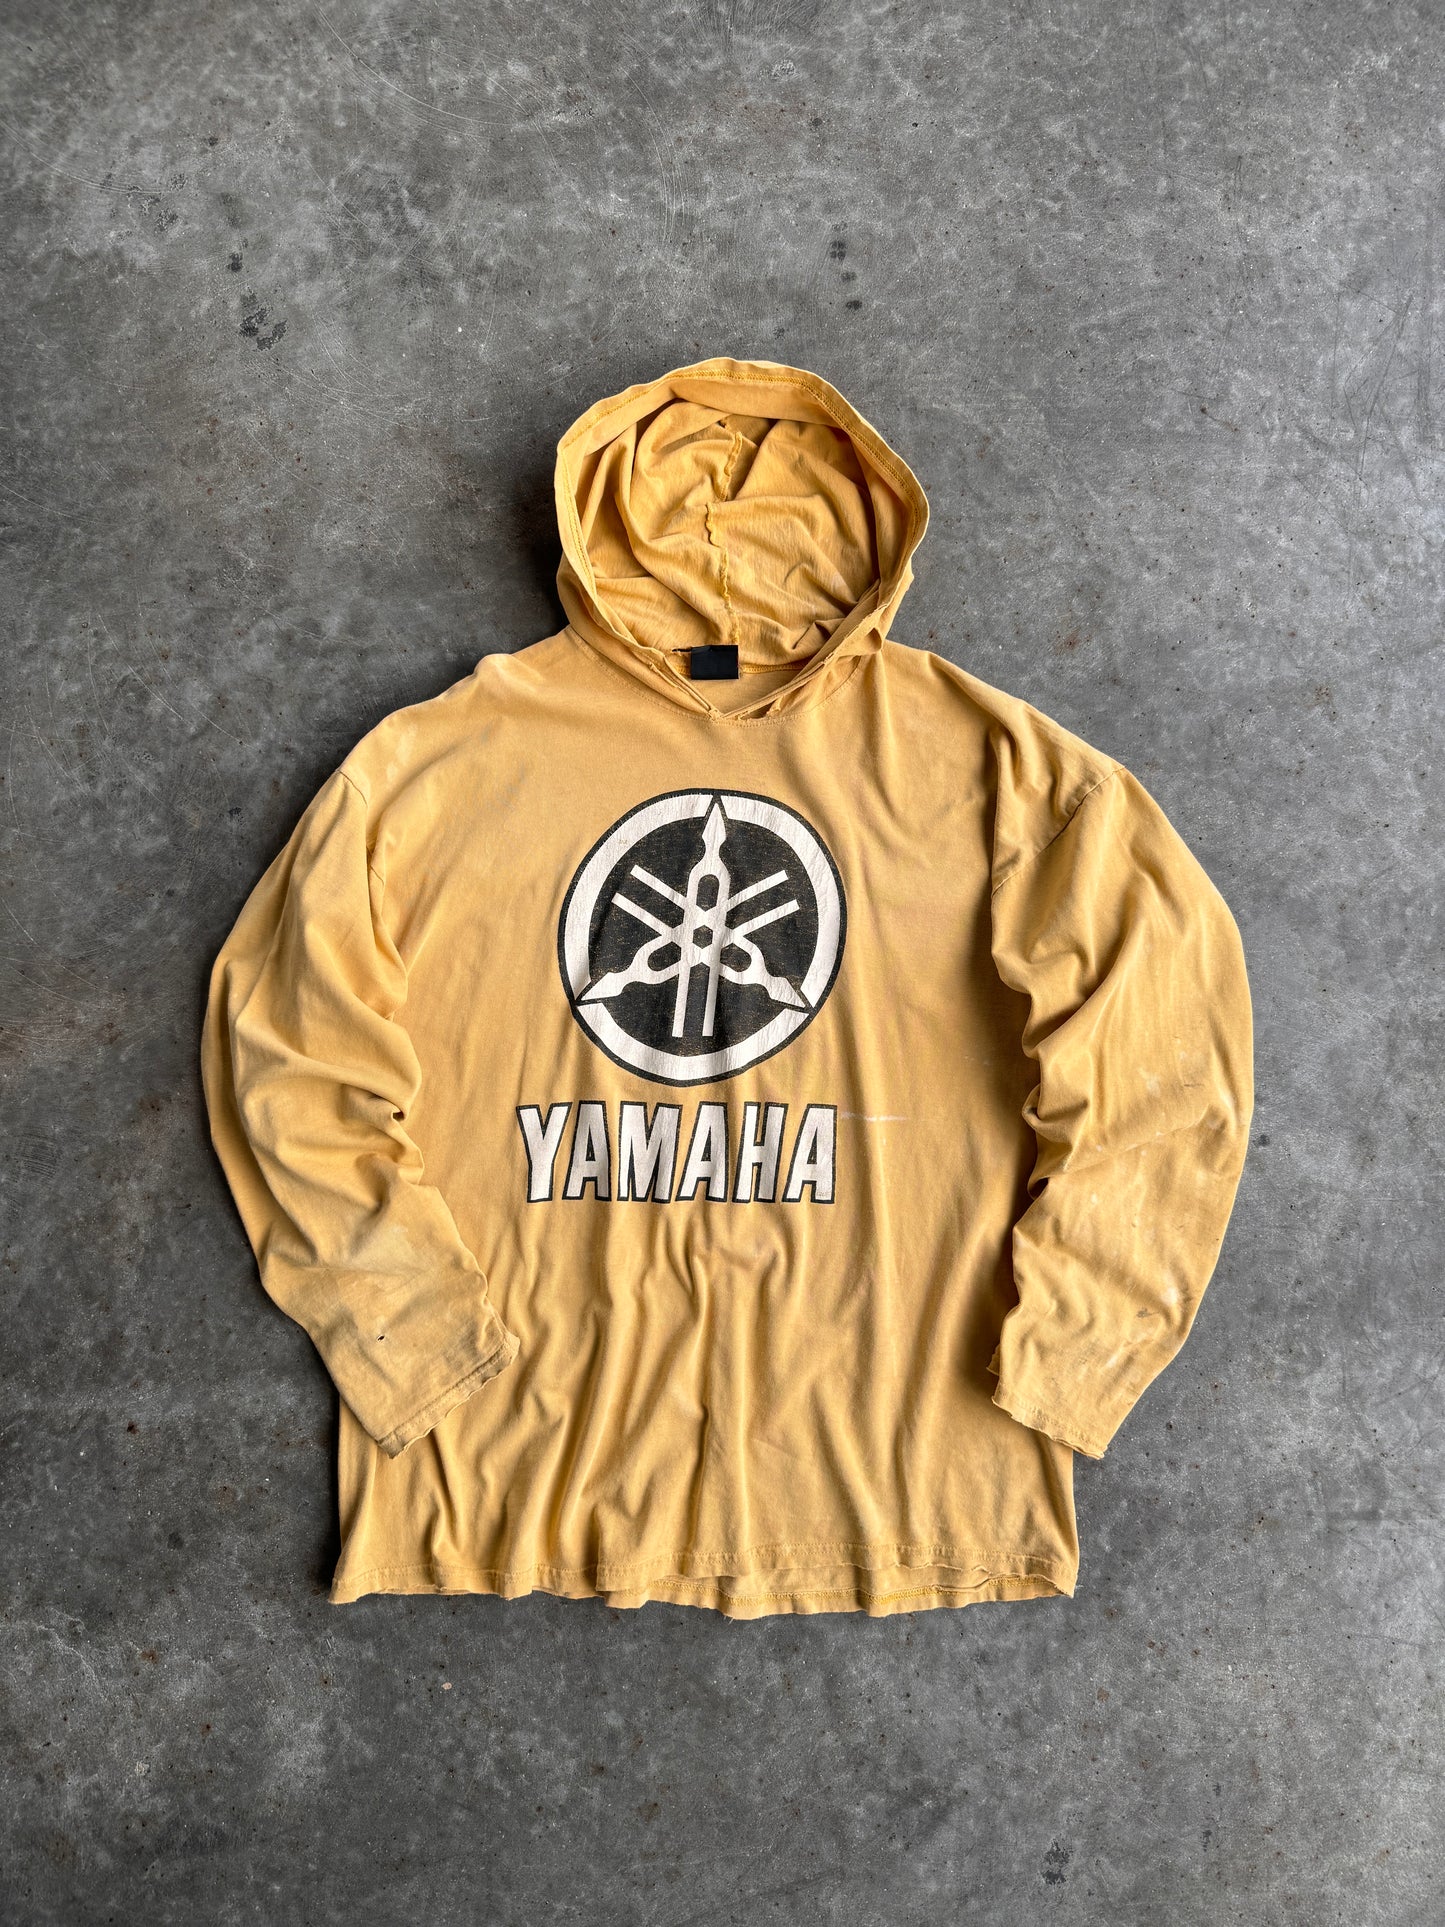 Vintage Yamaha Spellout Thin Hoodie - XL